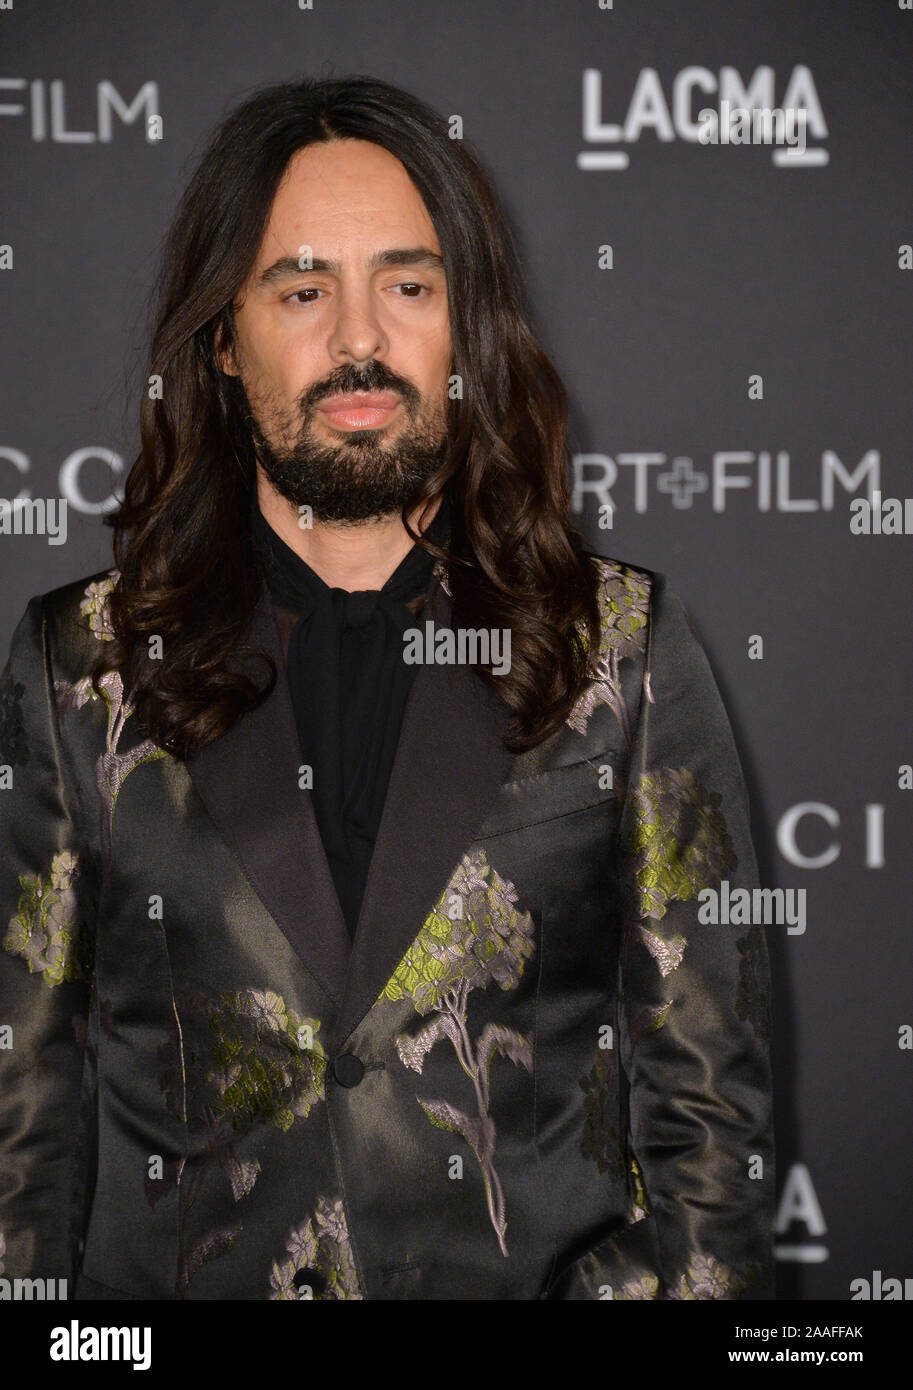 LOS ANGELES, CA - NOVEMBER 7, 2015: Alessandro Michele, Gucci creative  director, at the 2015 LACMA Art+Film Gala at the Los Angeles County Museum  of Art © 2015 Paul Smith / Featureflash Stock Photo - Alamy